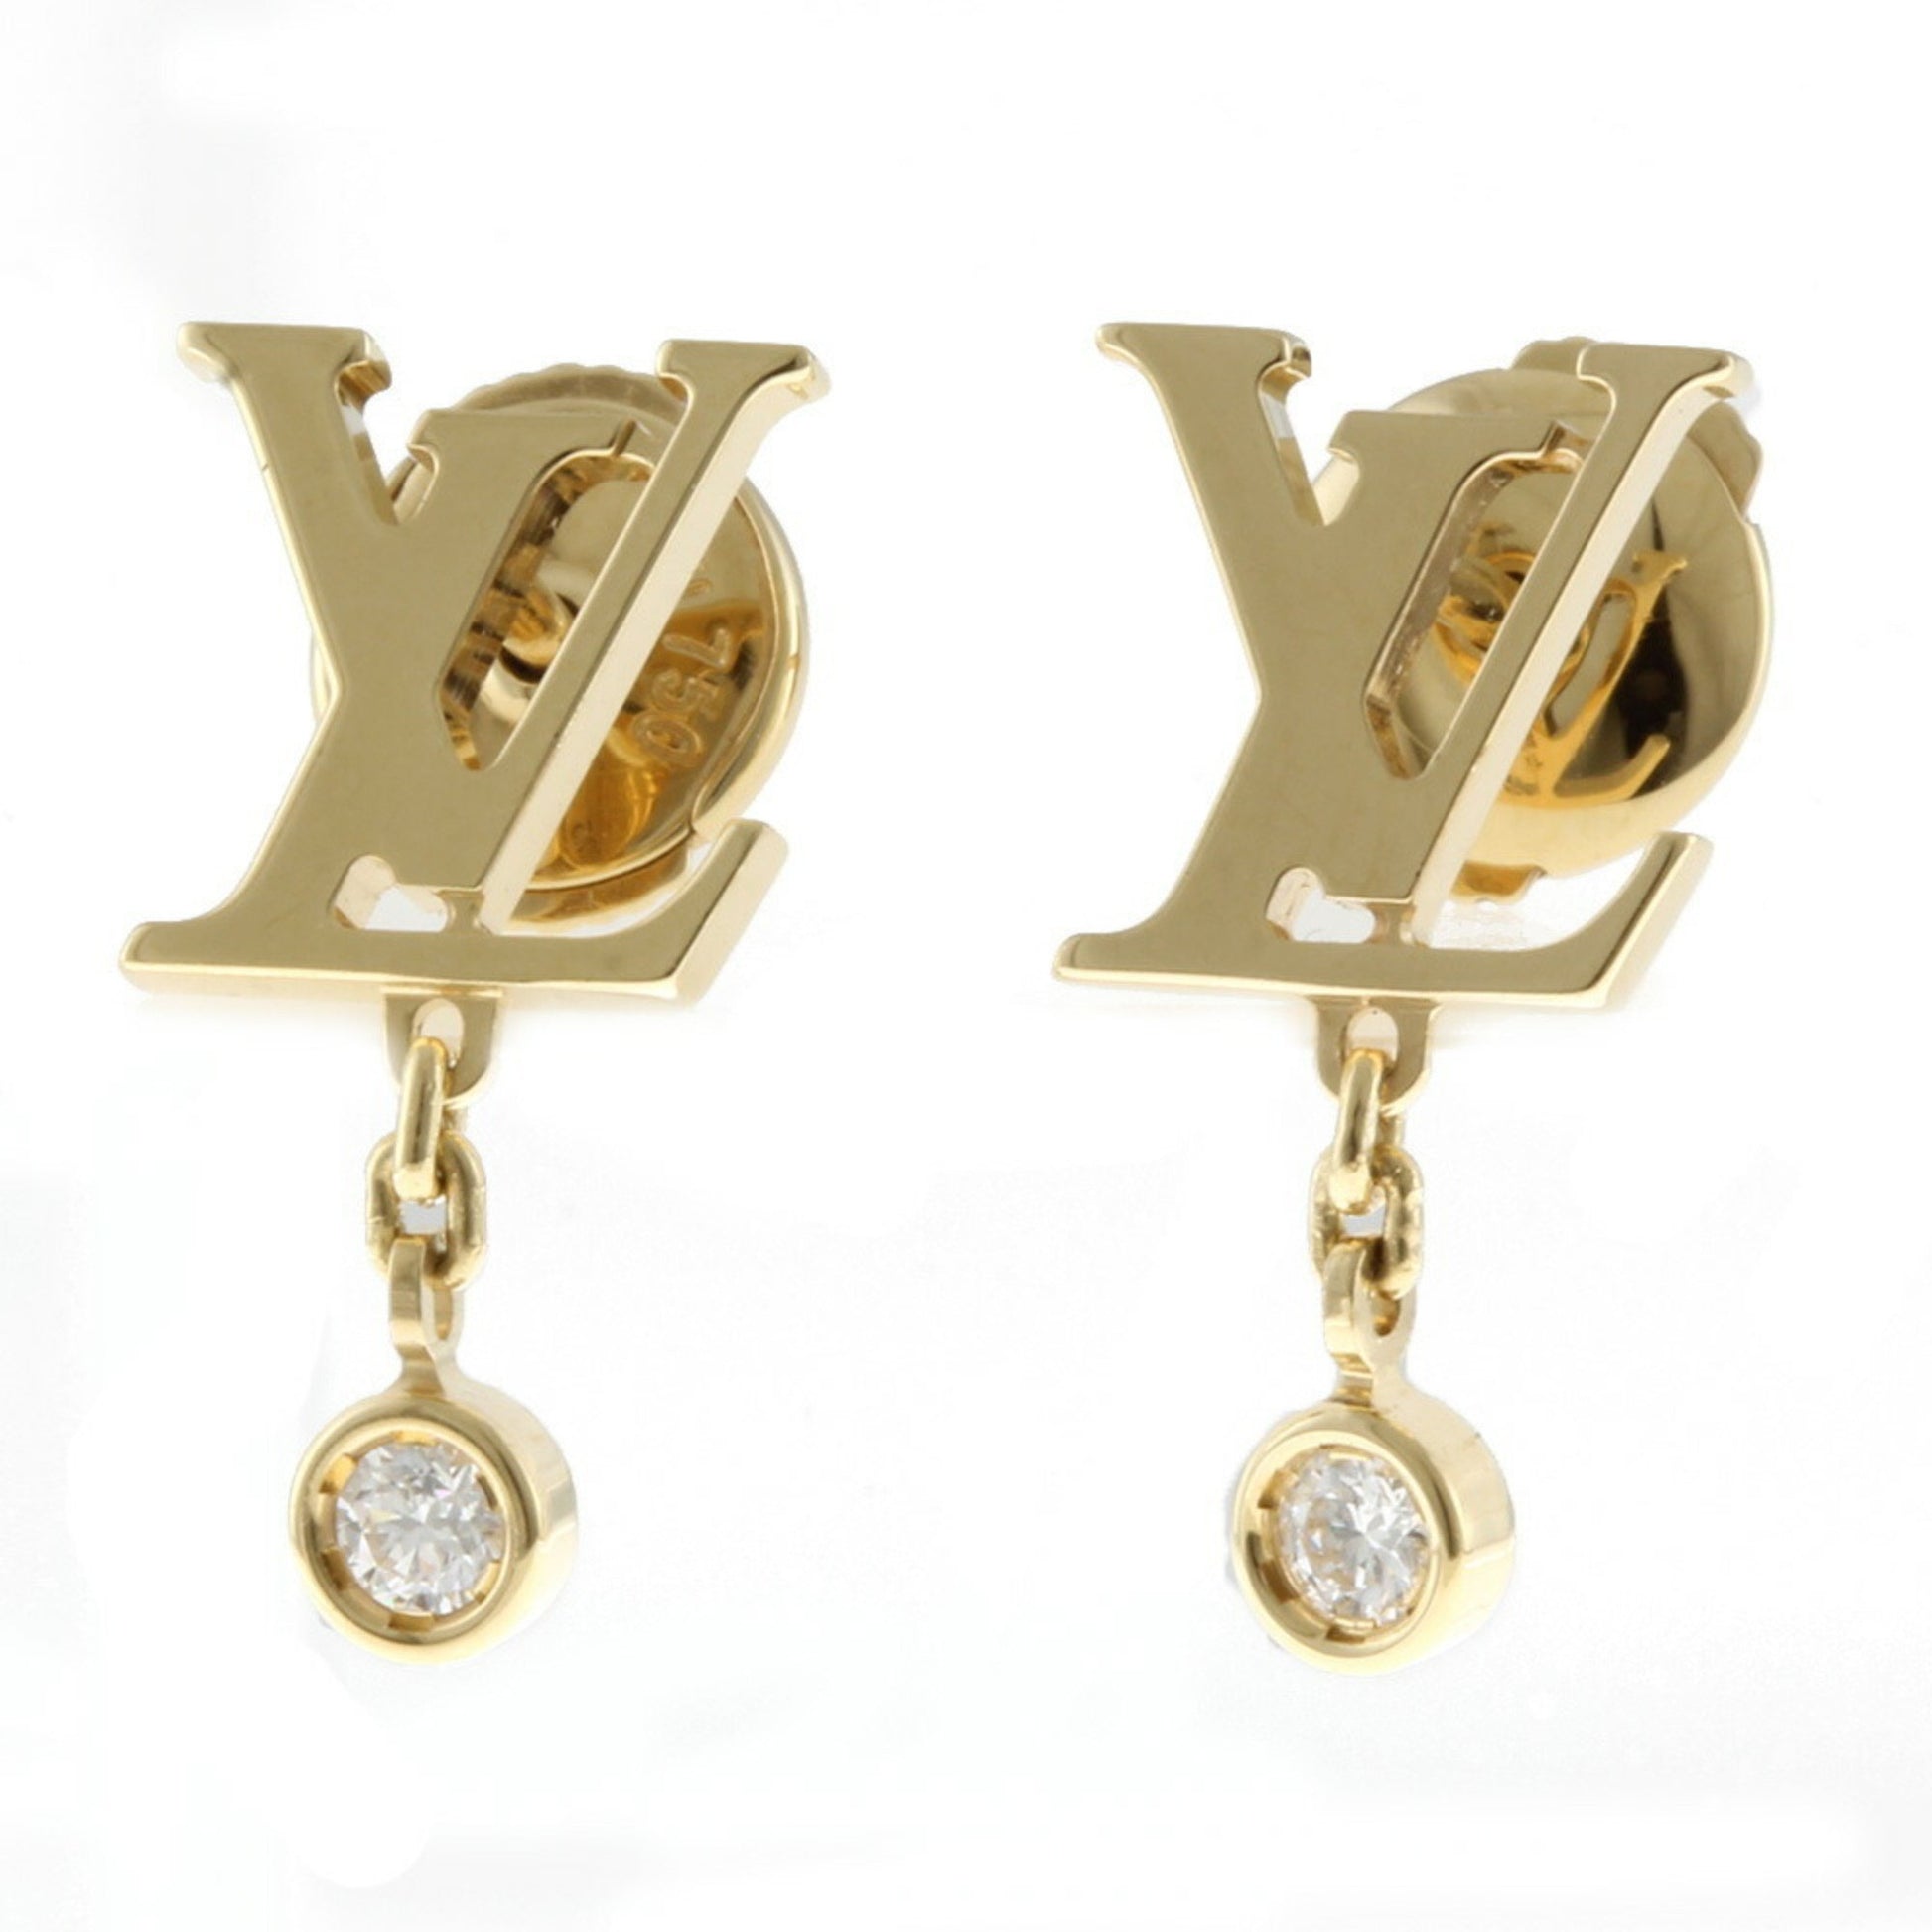 Idylle Blossom LV Ear Stud, Yellow Gold And Diamond - Per Unit - Categories